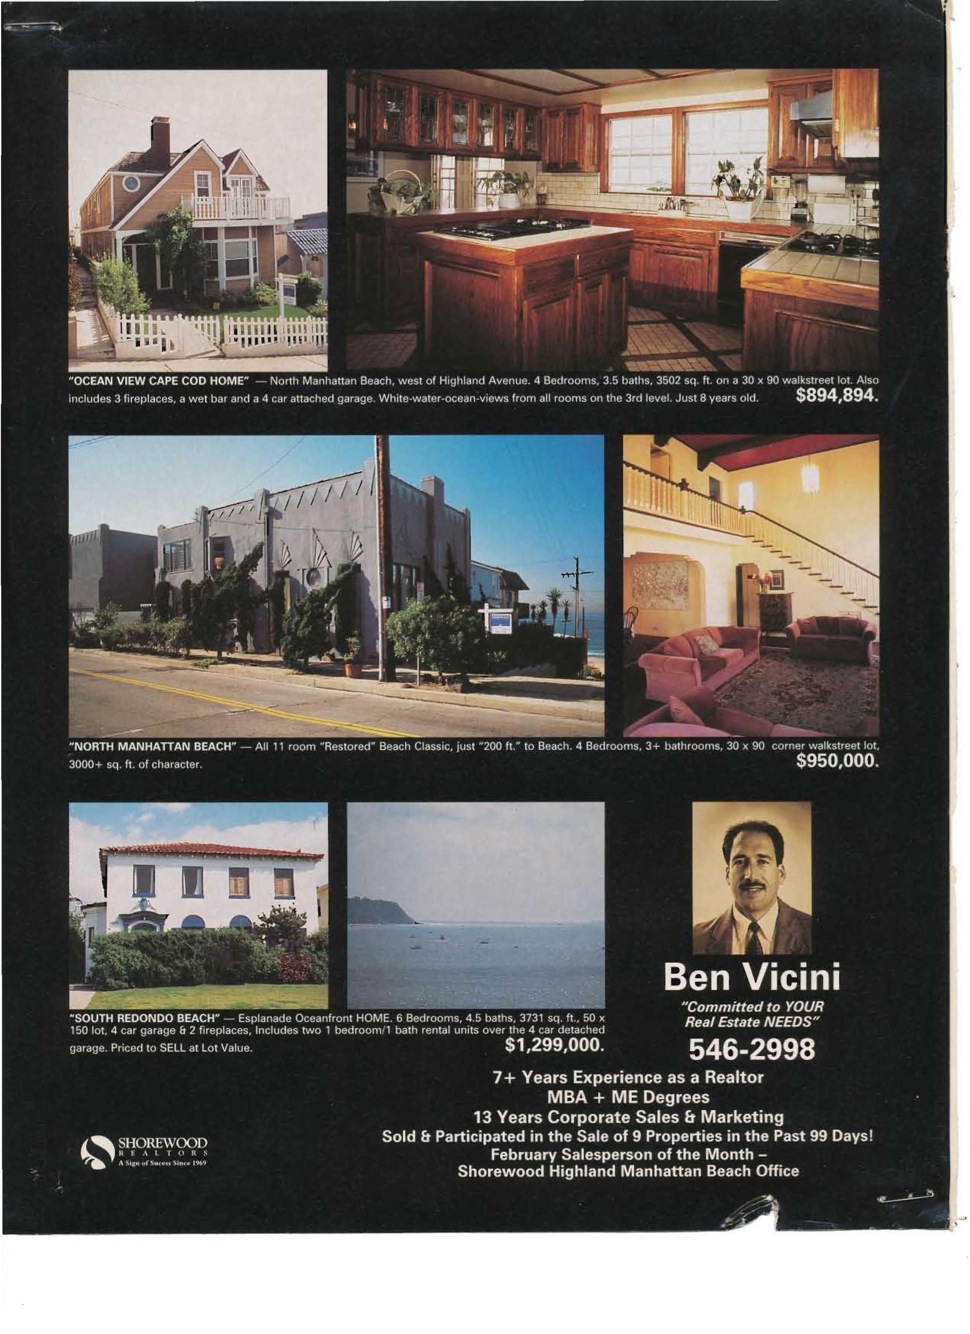 Vicini's Past Listings & Sales_Page_73